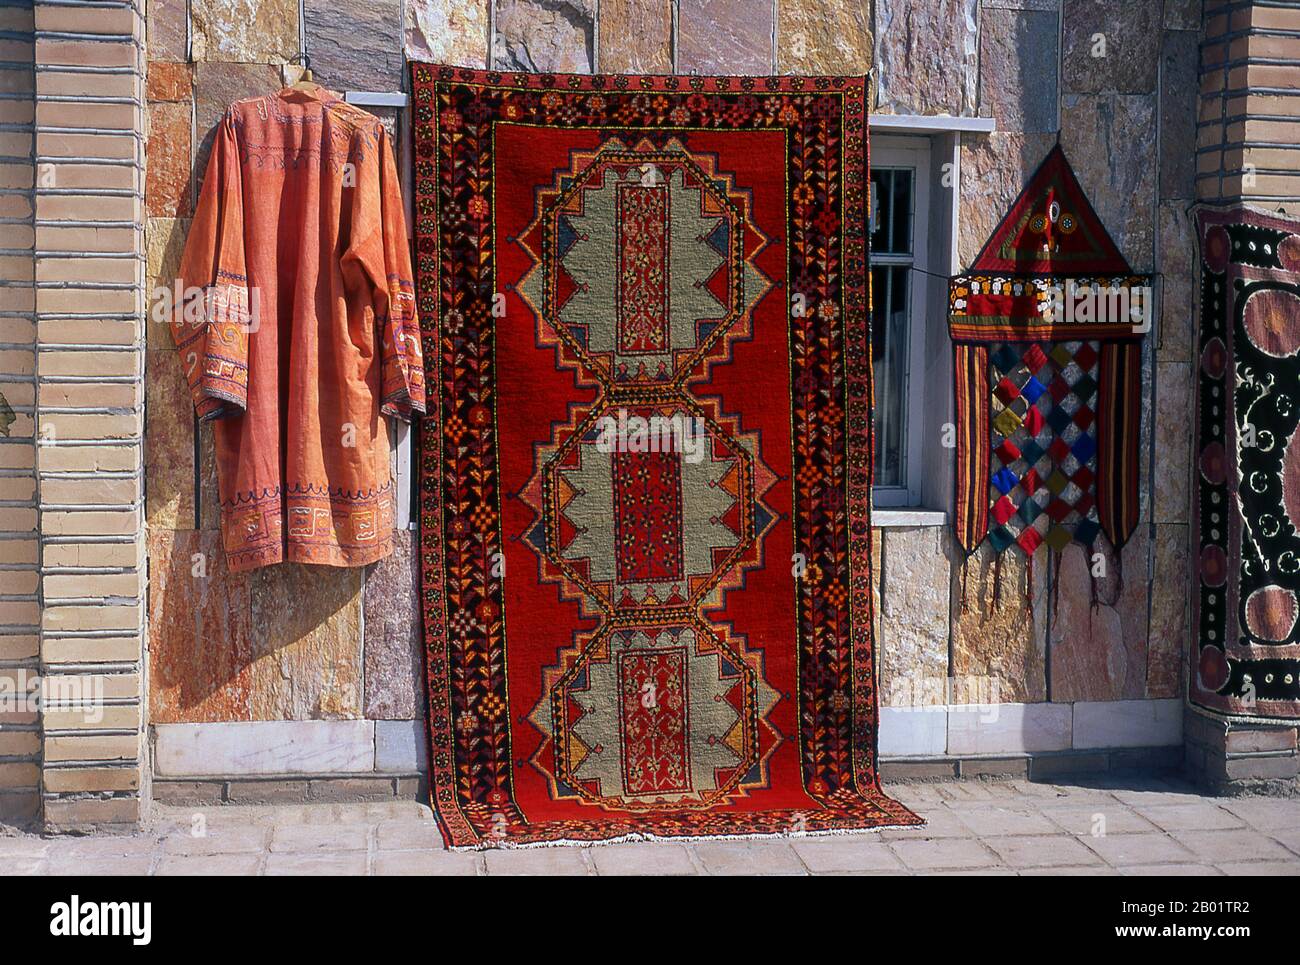 Uzbekistan: Carpet and clothing for sale in Samarkand.  Samarkand (Uzbek: Samarqand, from Sogdian: 'Stone Fort' or 'Rock Town') is the second-largest city in Uzbekistan and the capital of Samarqand Province. The city is most noted for its central position on the Silk Road between China and the West, and for being an Islamic centre for scholarly study.  In the 14th century it became the capital of the empire of Timur (Tamerlane) and is the site of his mausoleum (the Gur-e Amir). The Bibi-Khanym Mosque remains one of the city's most notable landmarks. Stock Photo